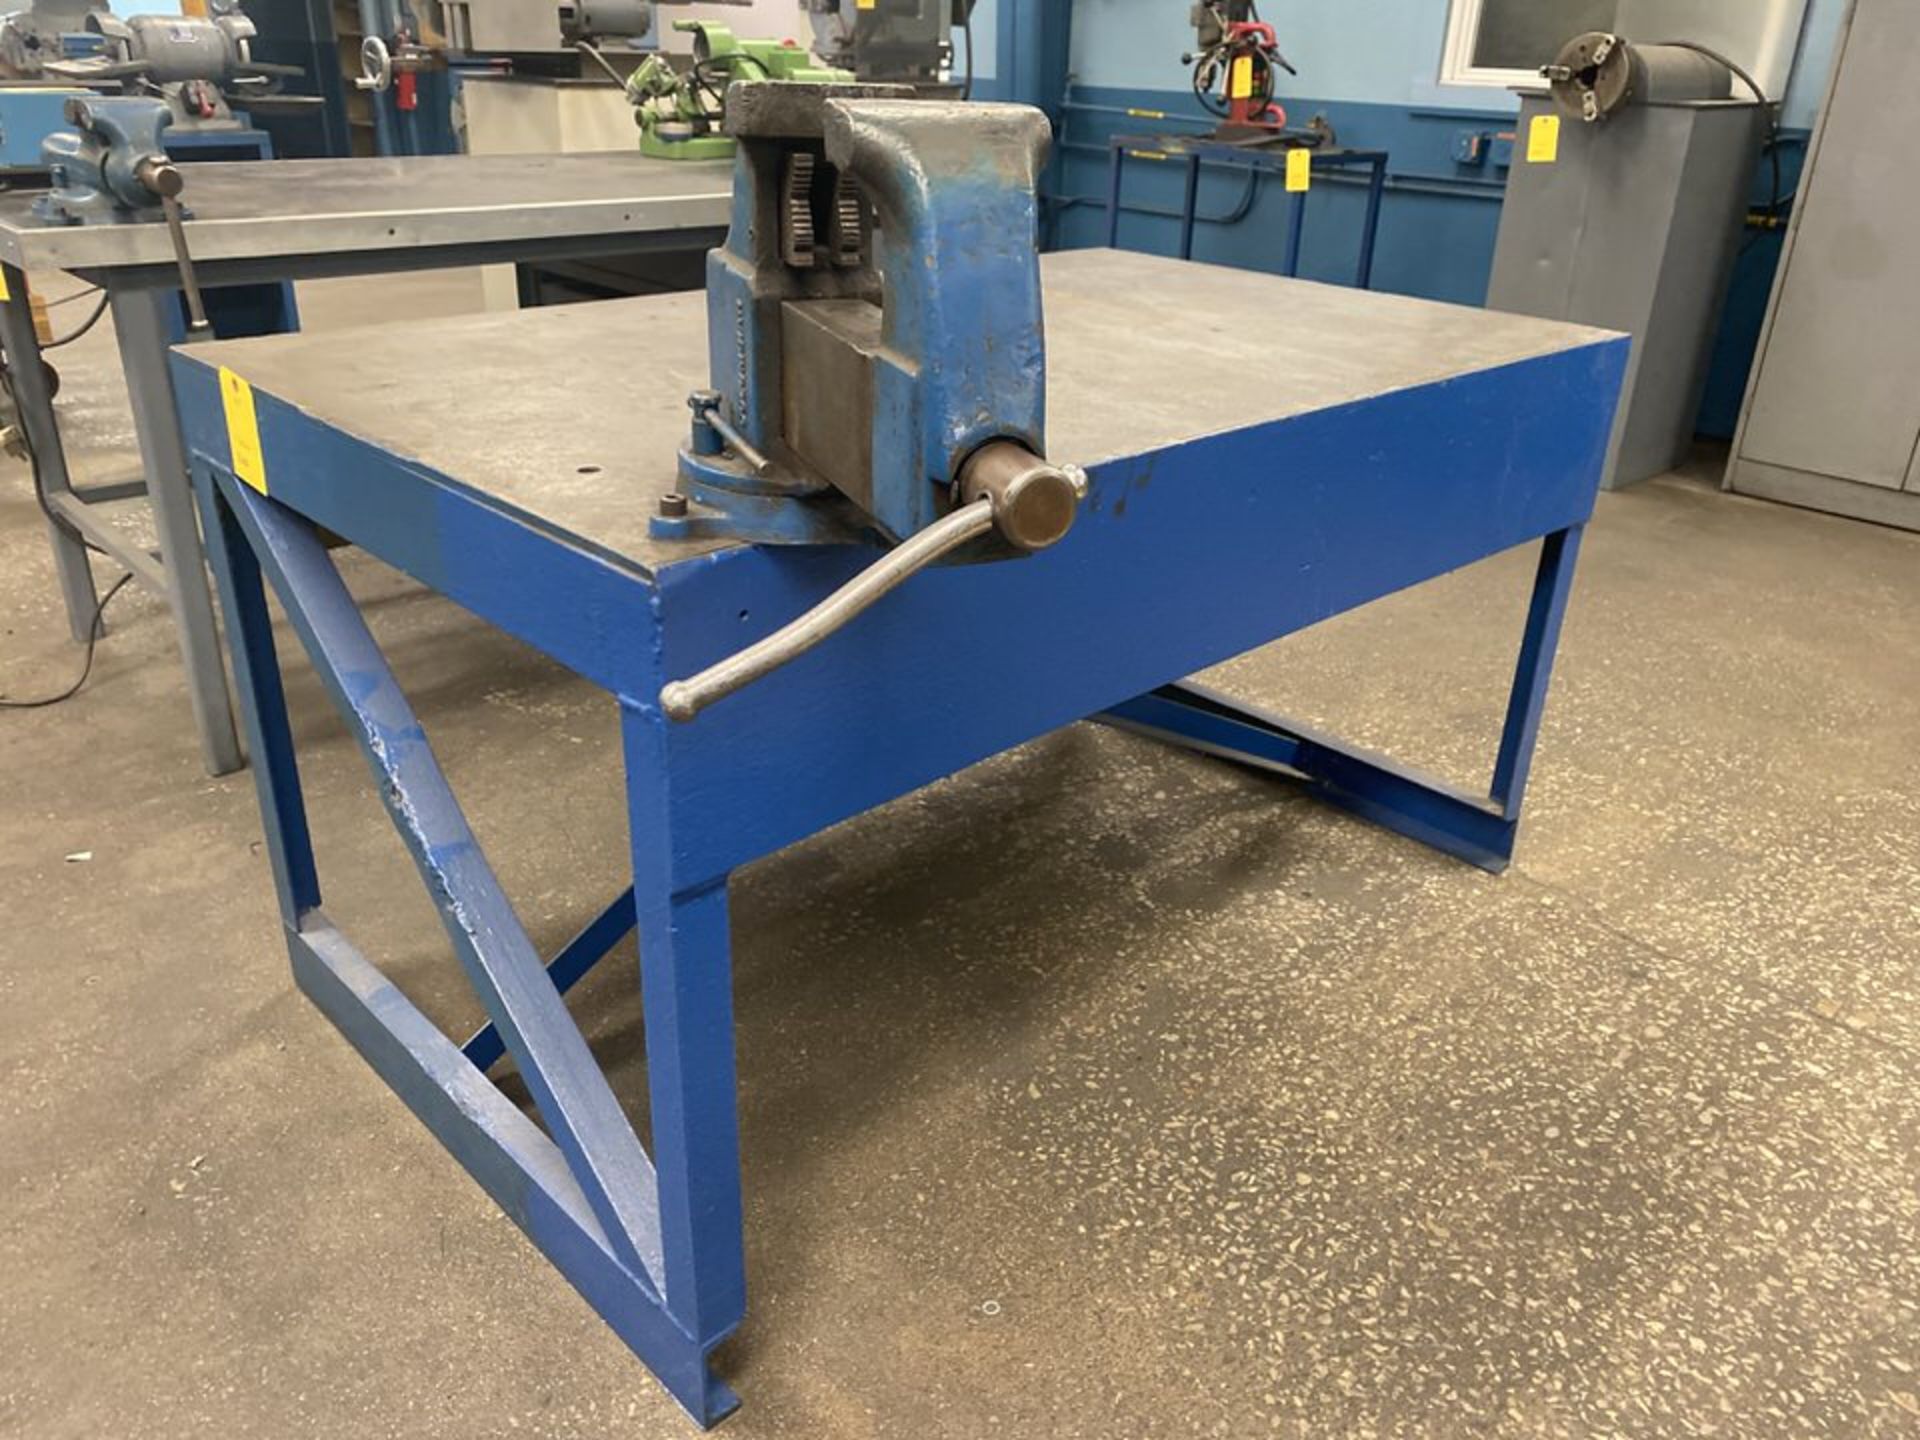 60" x 36" HD Metal Shop Table with Columbian Rotating Vise